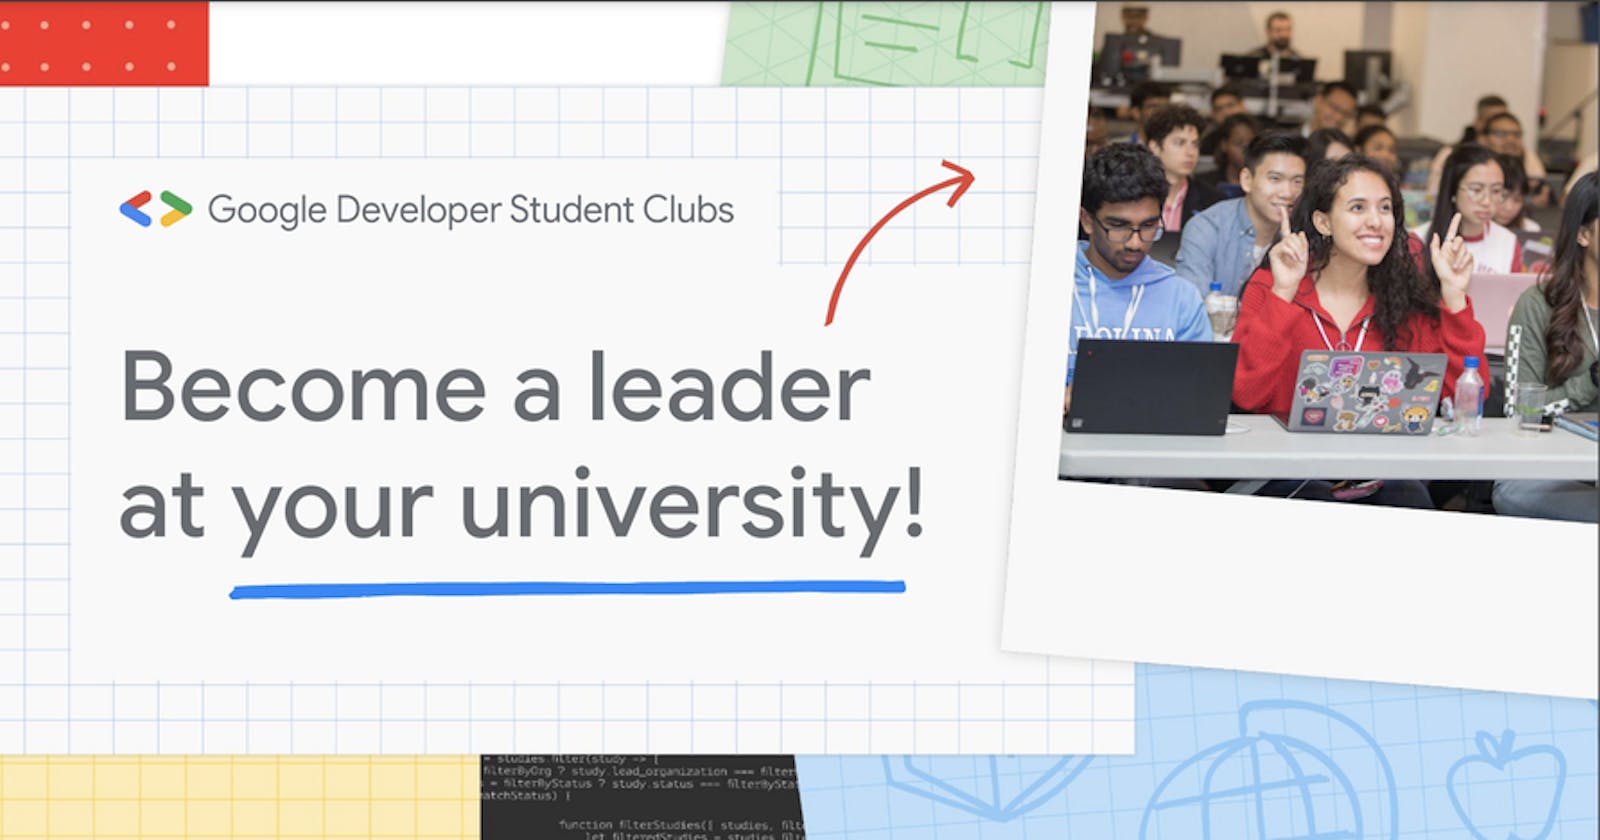 How to Become/Apply For Google Developer Student Club Lead?